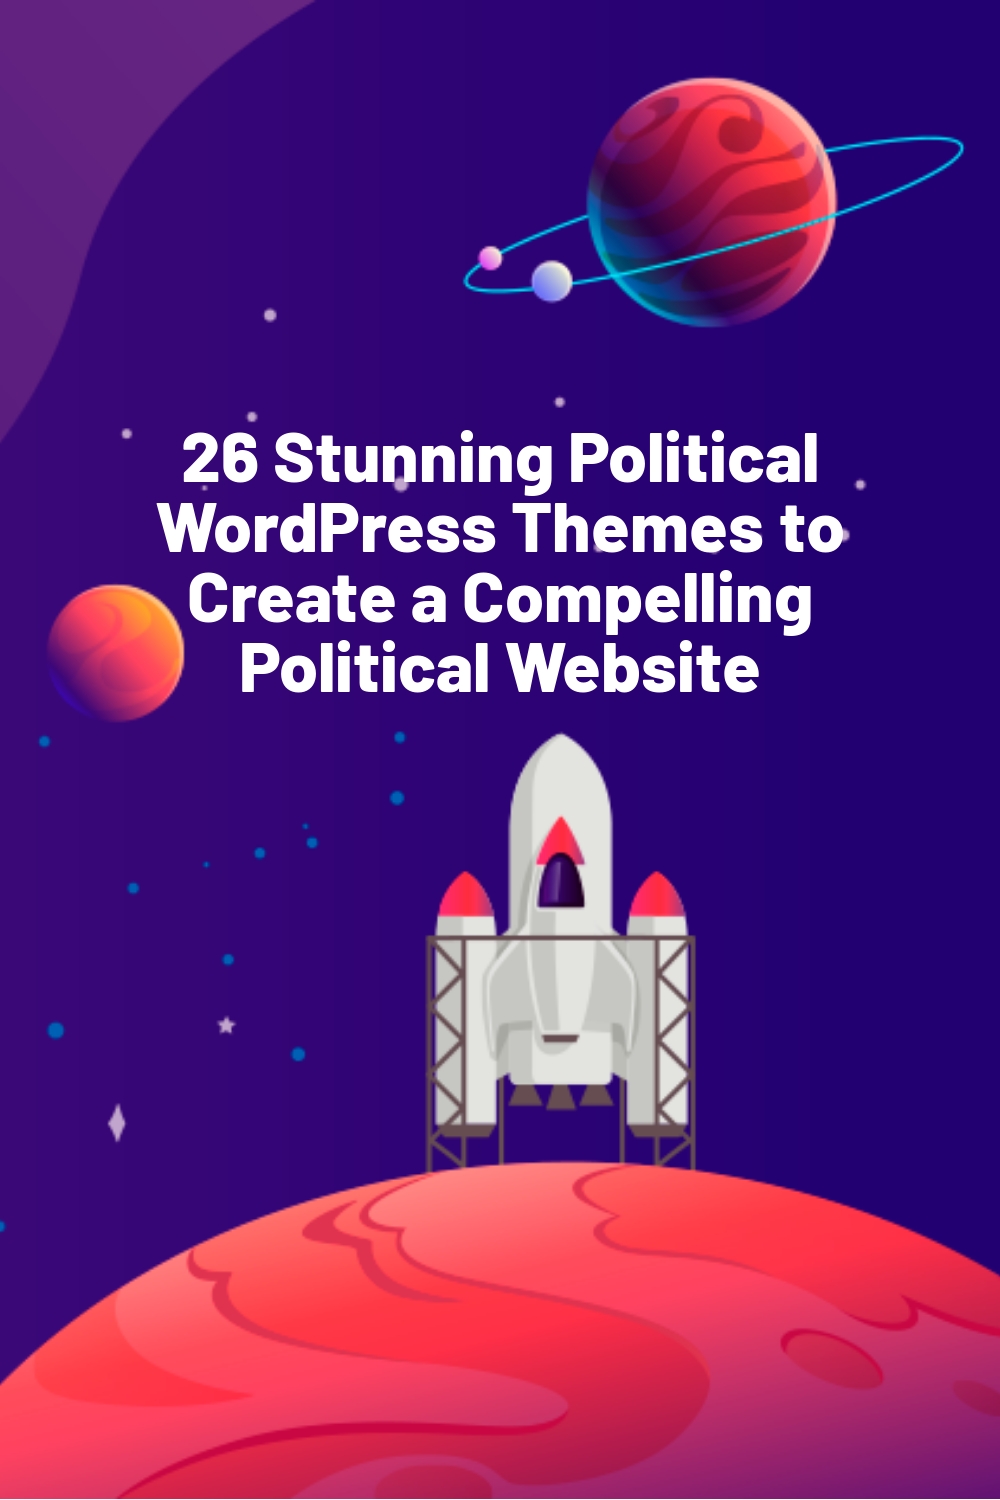 26 Stunning Political WordPress Themes to Create a Compelling Political Website